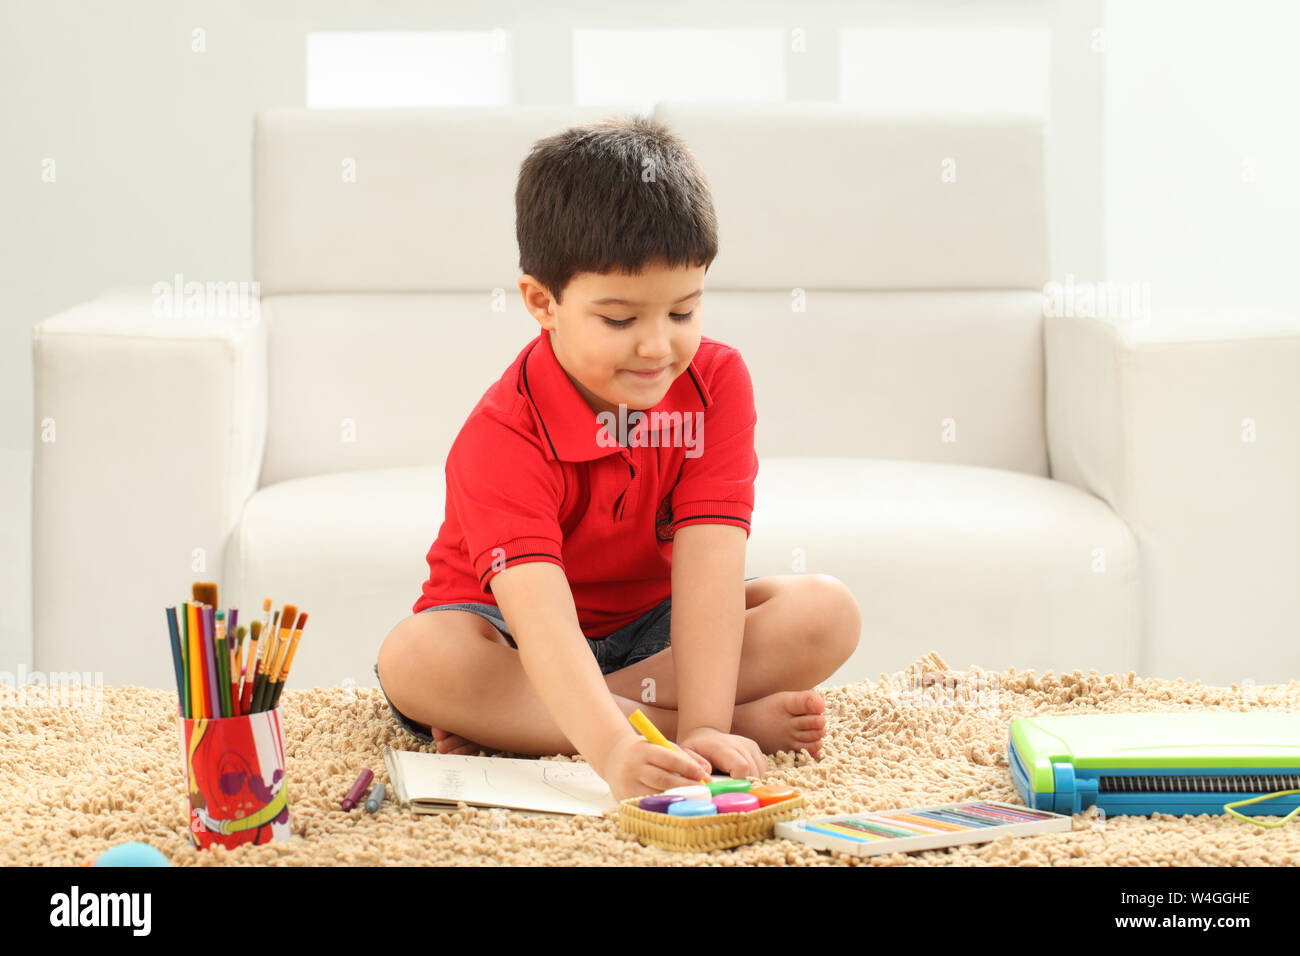 Boy coloring a book in a living room Stock Photo